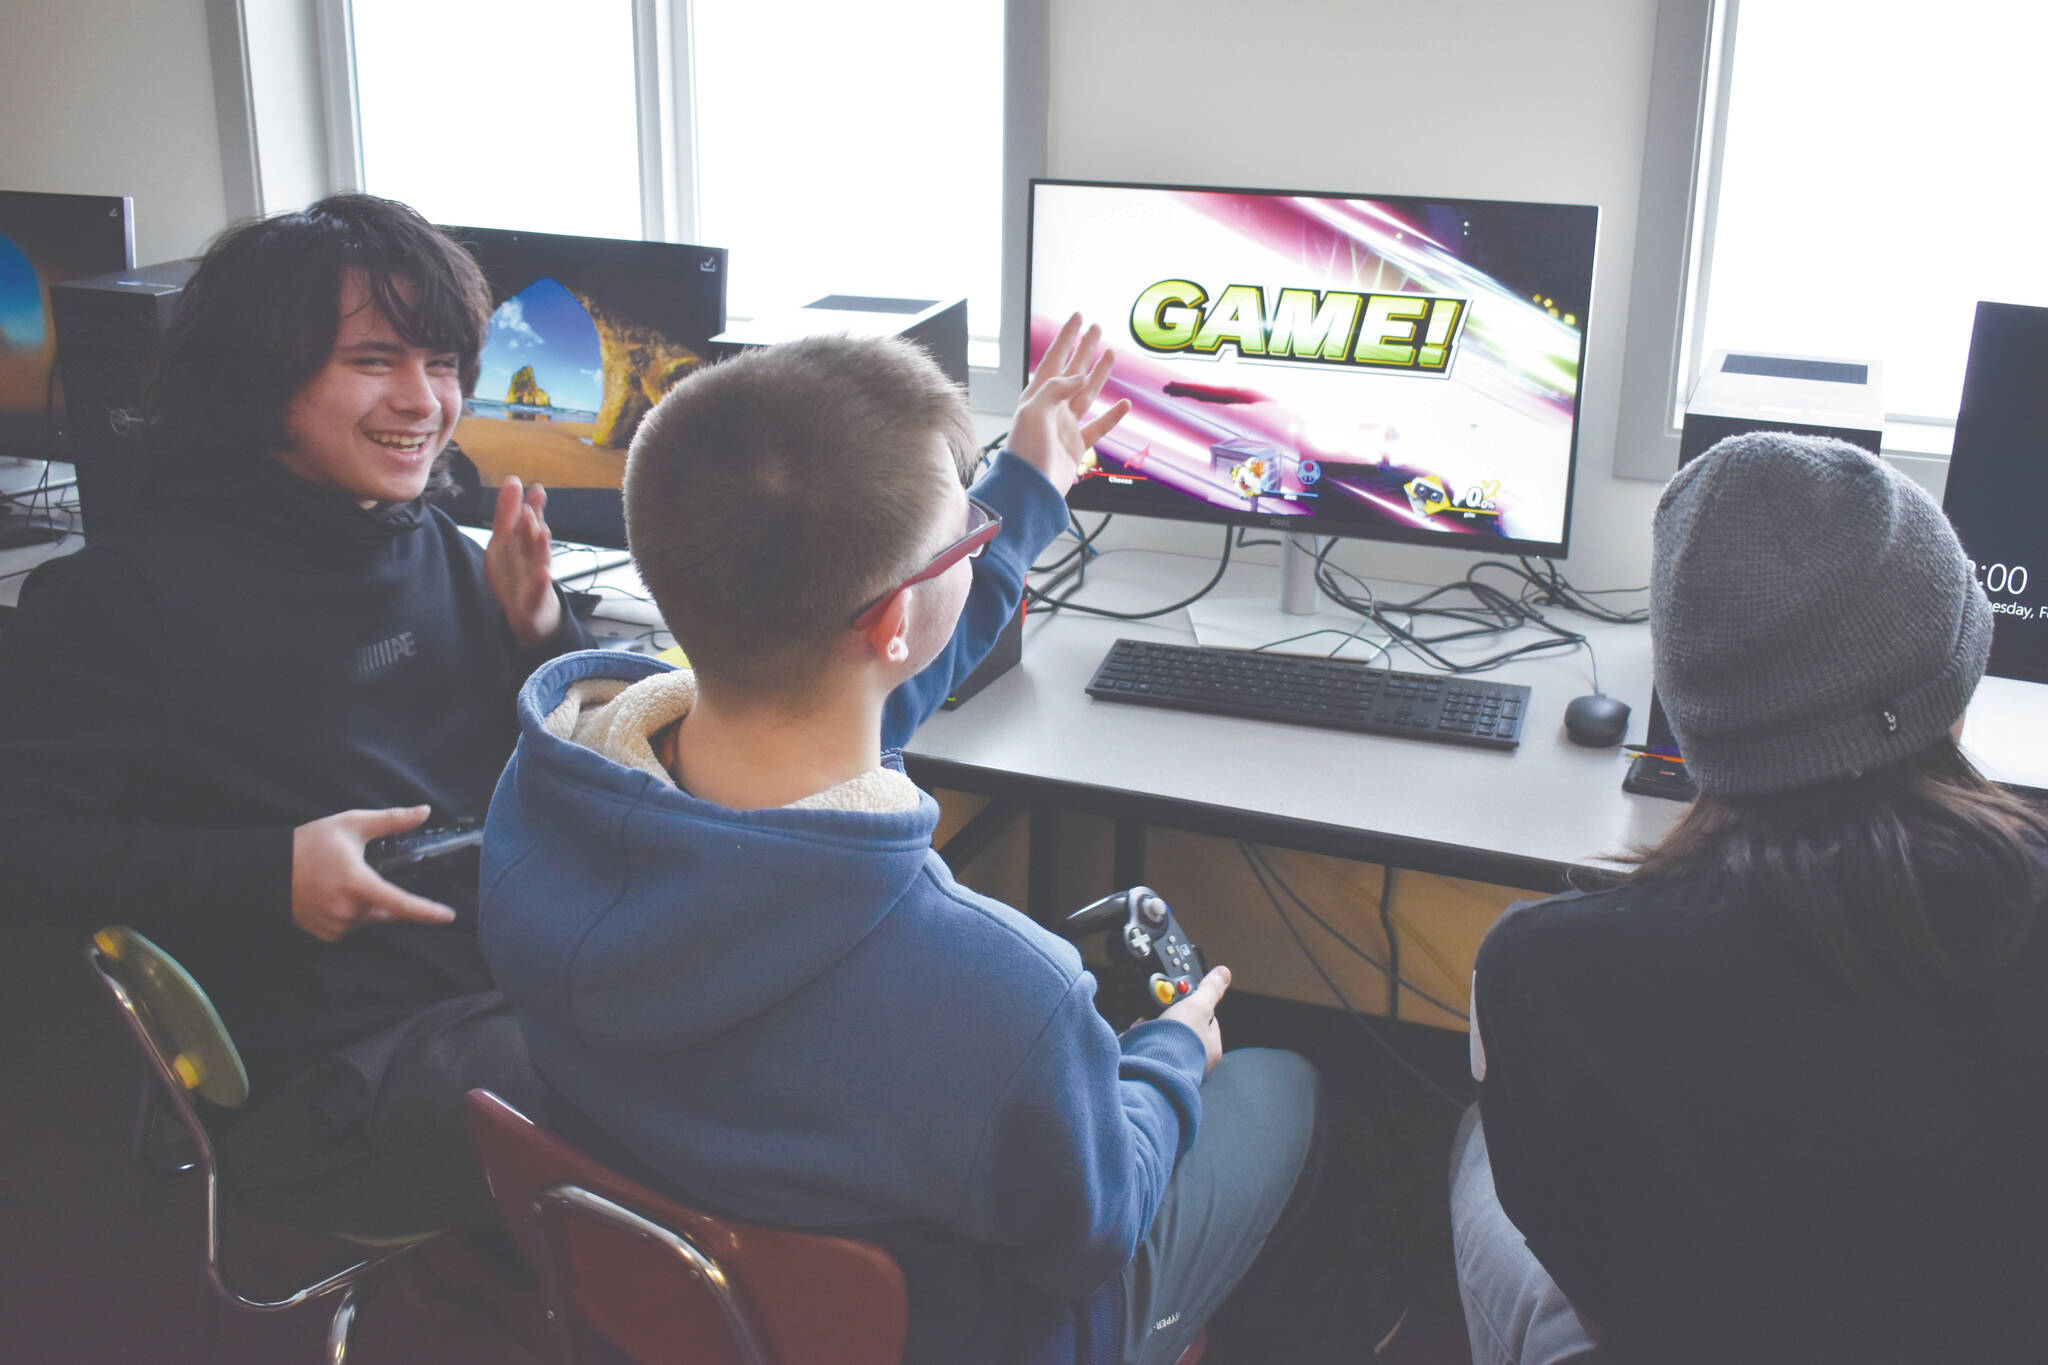 Jake Dye/Peninsula Clarion 
Eli Castro, Blake Gillis and Kaizen Fuller either celebrate victory or cry out in defeat at the end of a practice match of Super Smash Bros. Ultimate played ahead of a scheduled game at Kenai Central High School on Wednesday.